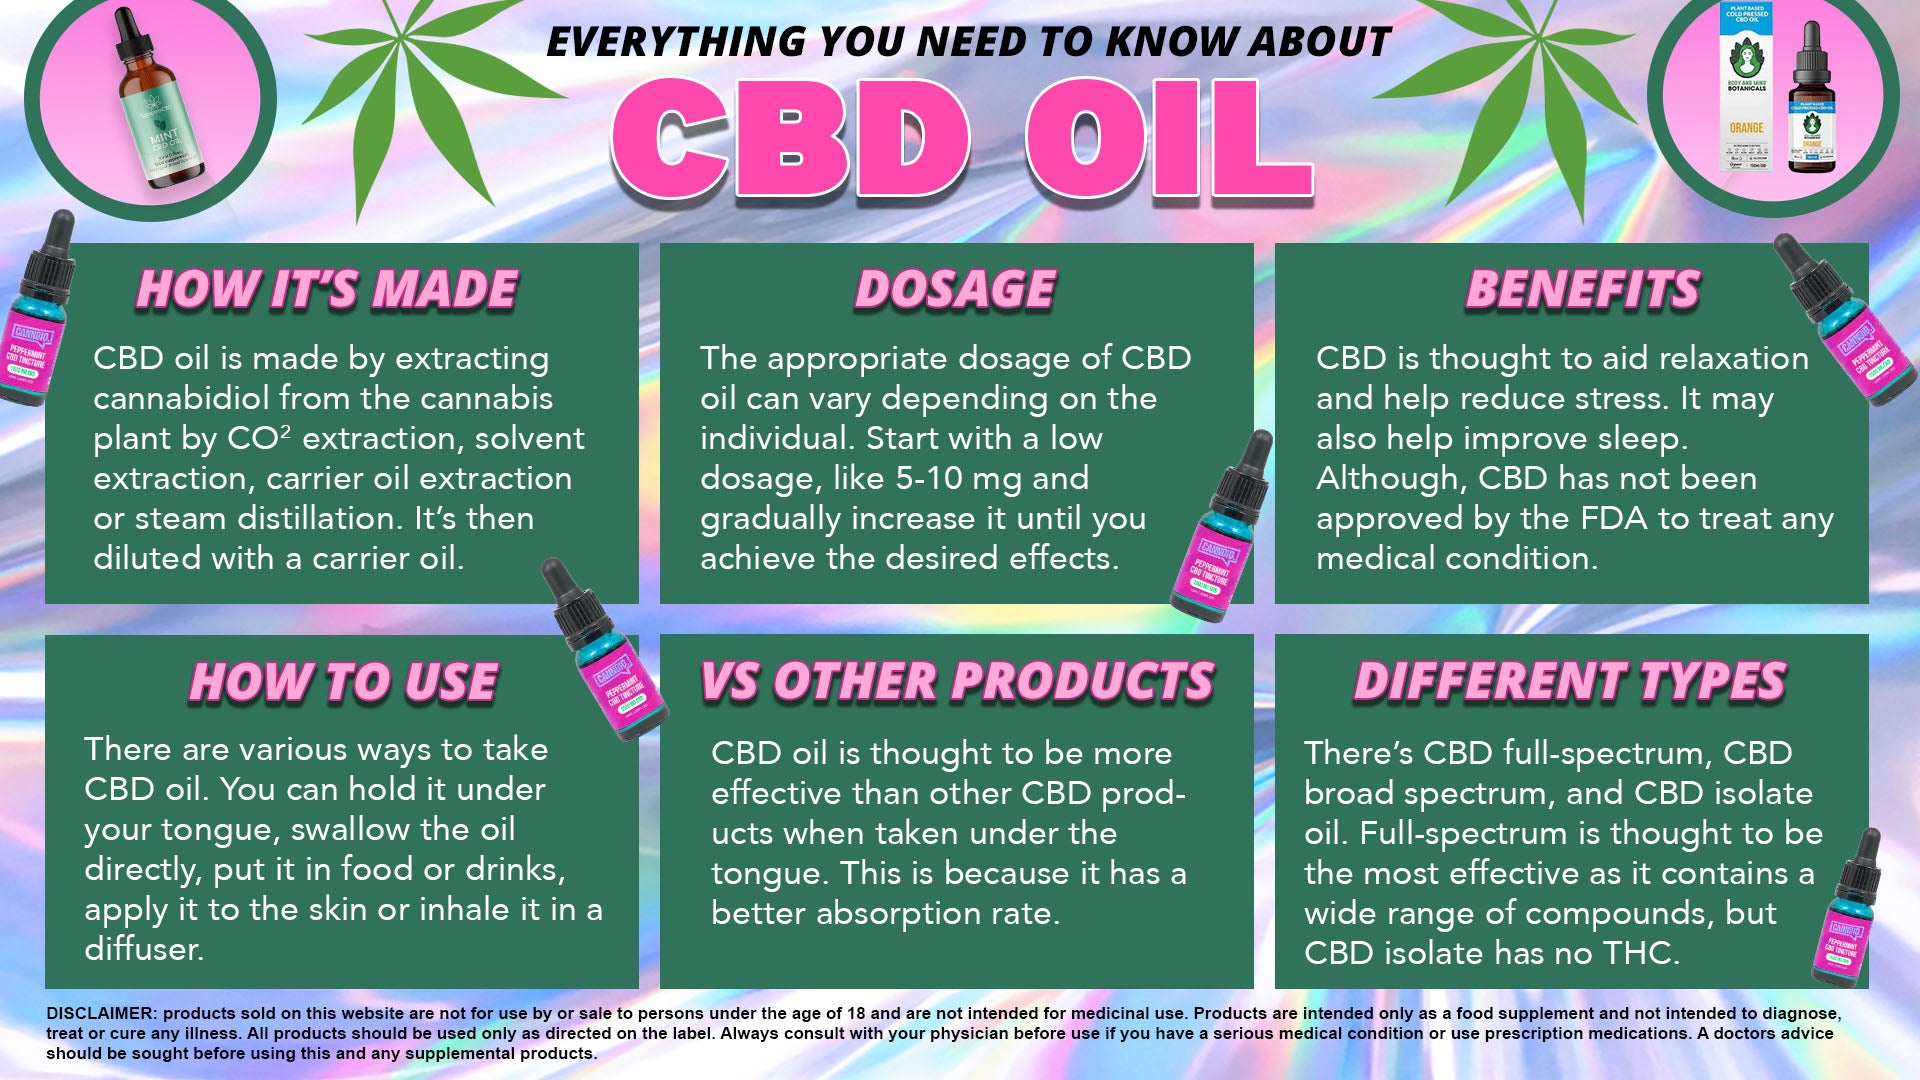 What Does CBD Oil Do and Taste Like?